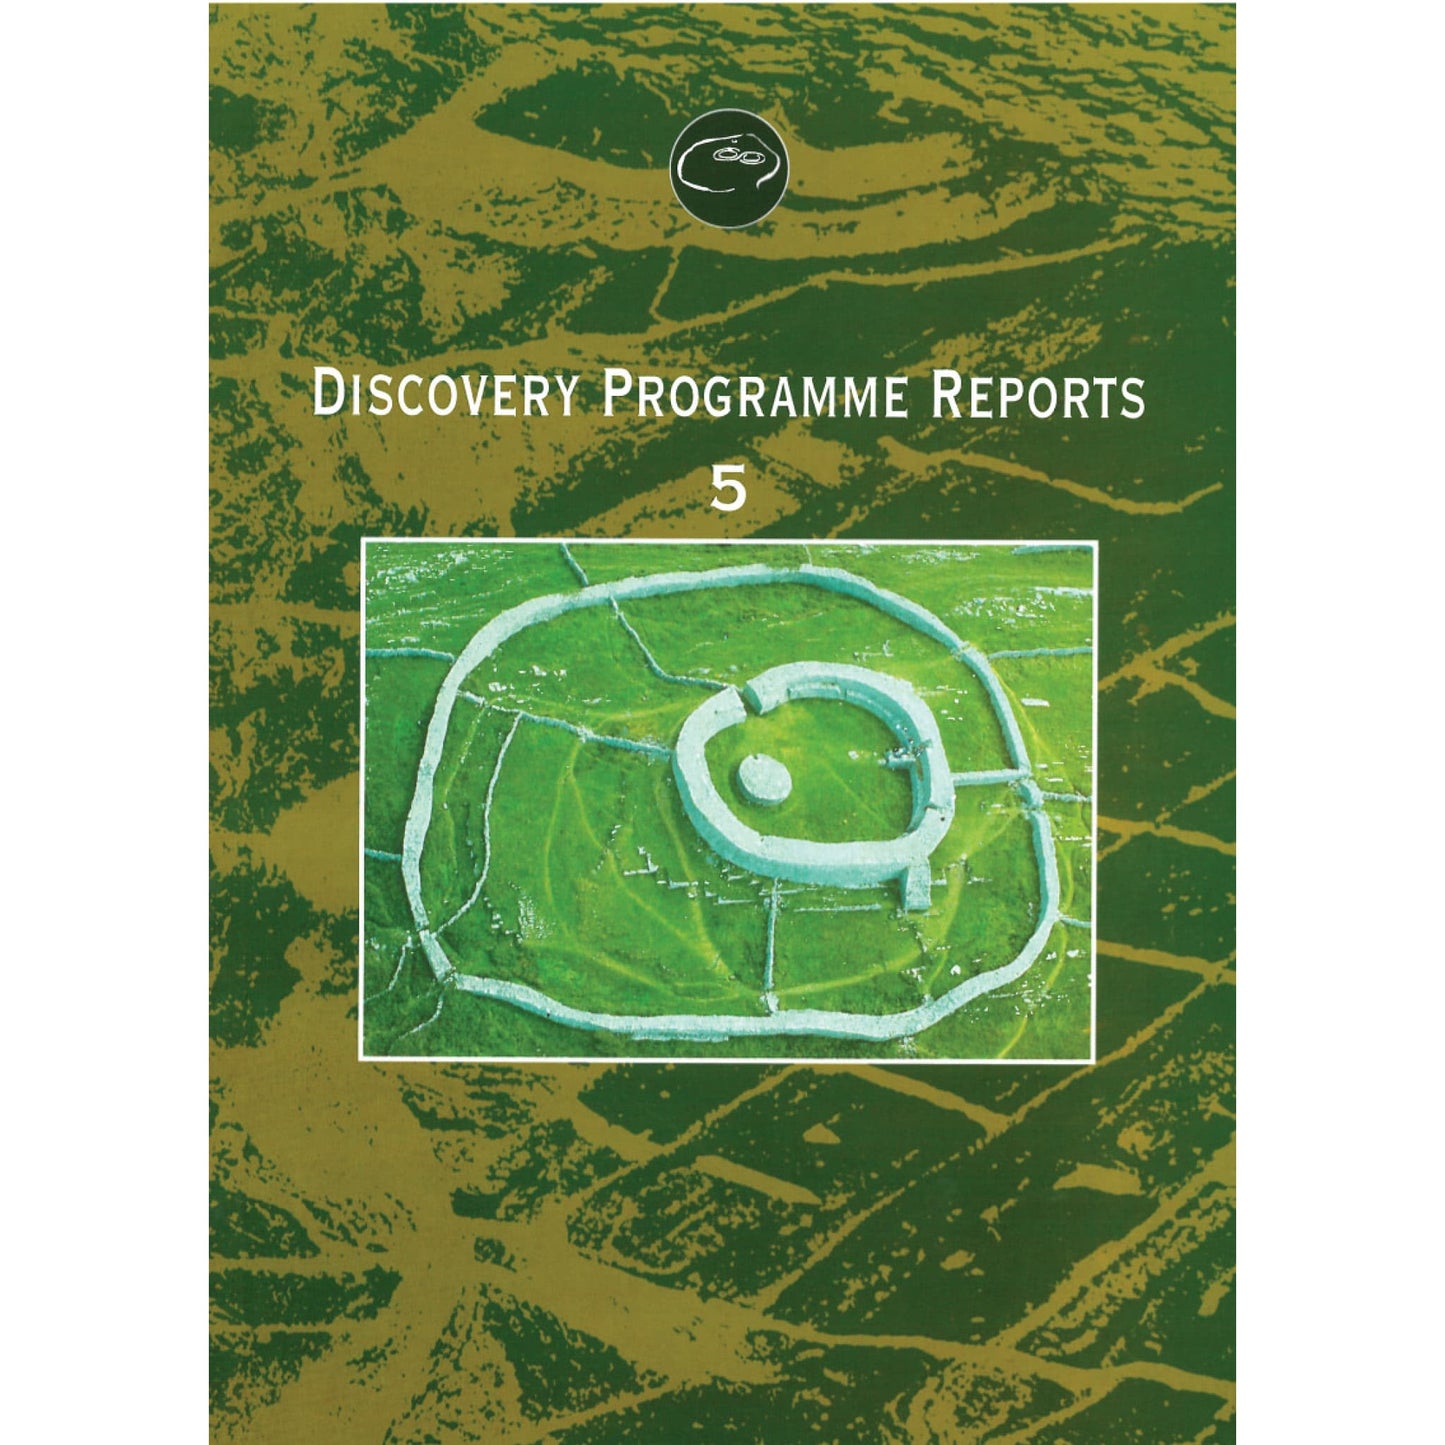 Discovery Programme Reports: No. 5: Project Results 1997